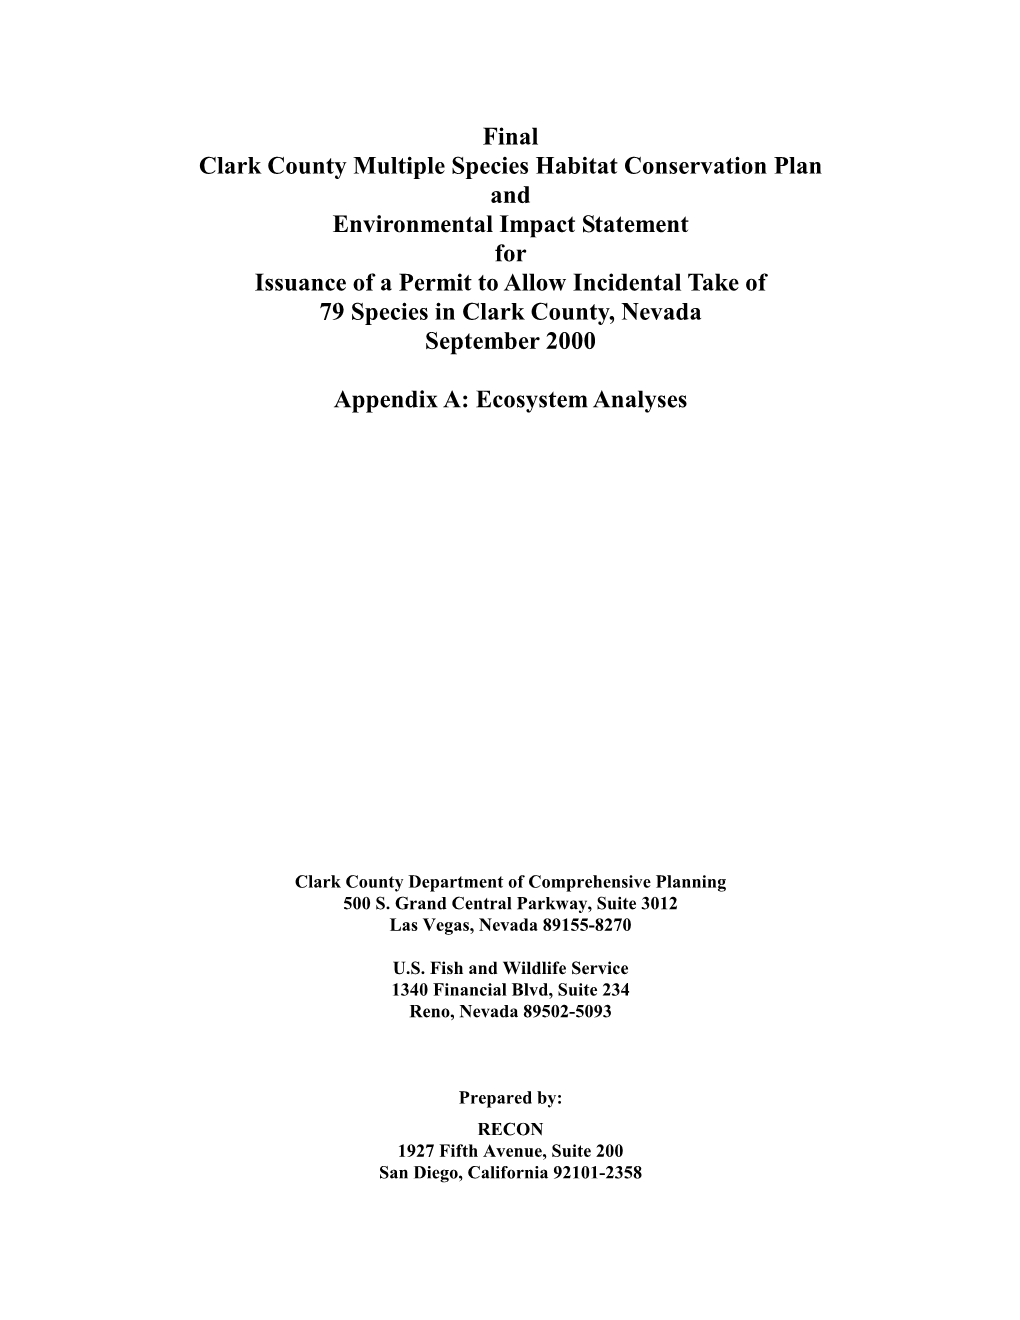 Final Clark County Multiple Species Habitat Conservation Plan and Environmental Impact Statement for Issuance of a Permit To